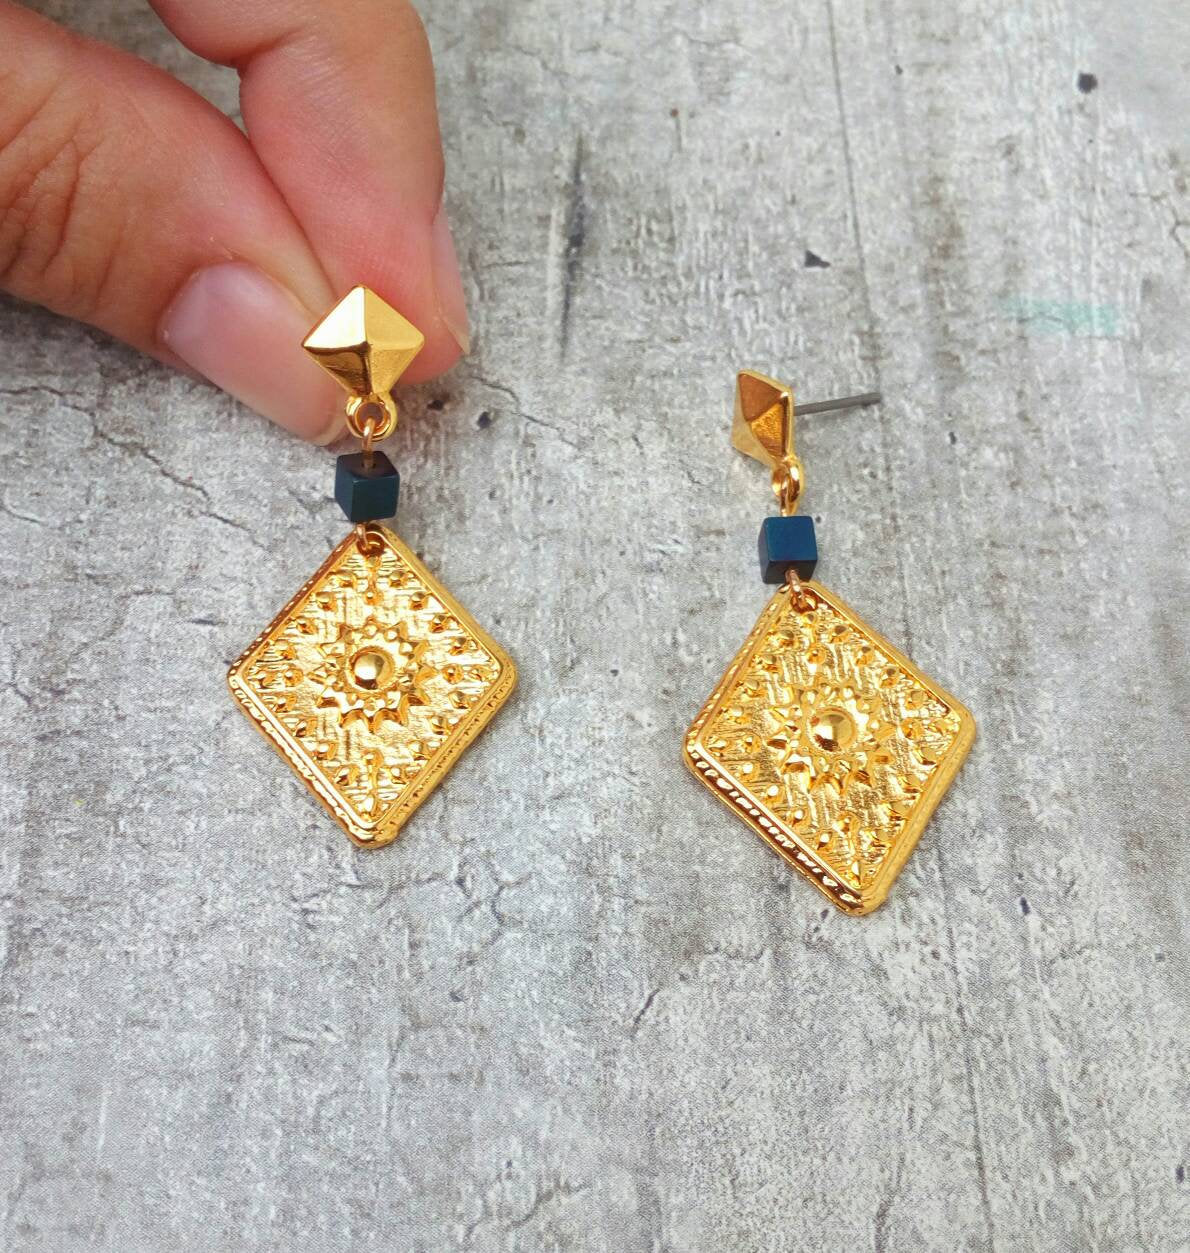 Ancient Greek Earrings, 22k Gold Earrings With Square Hematite